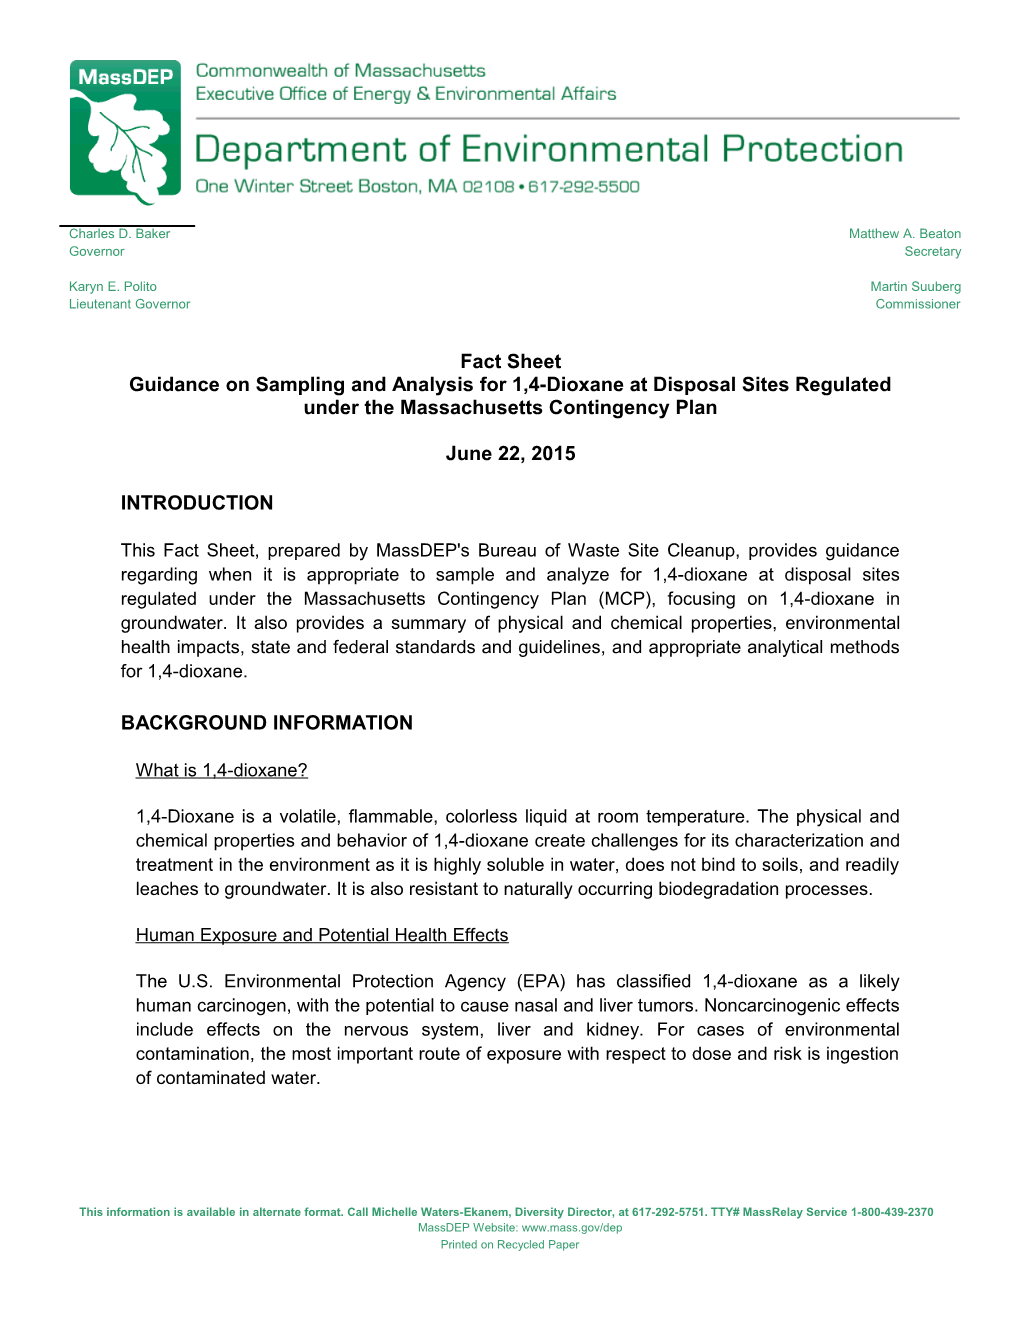 Guidance on Sampling and Analysis for 1,4-Dioxane at Disposal Sites Regulated Under The